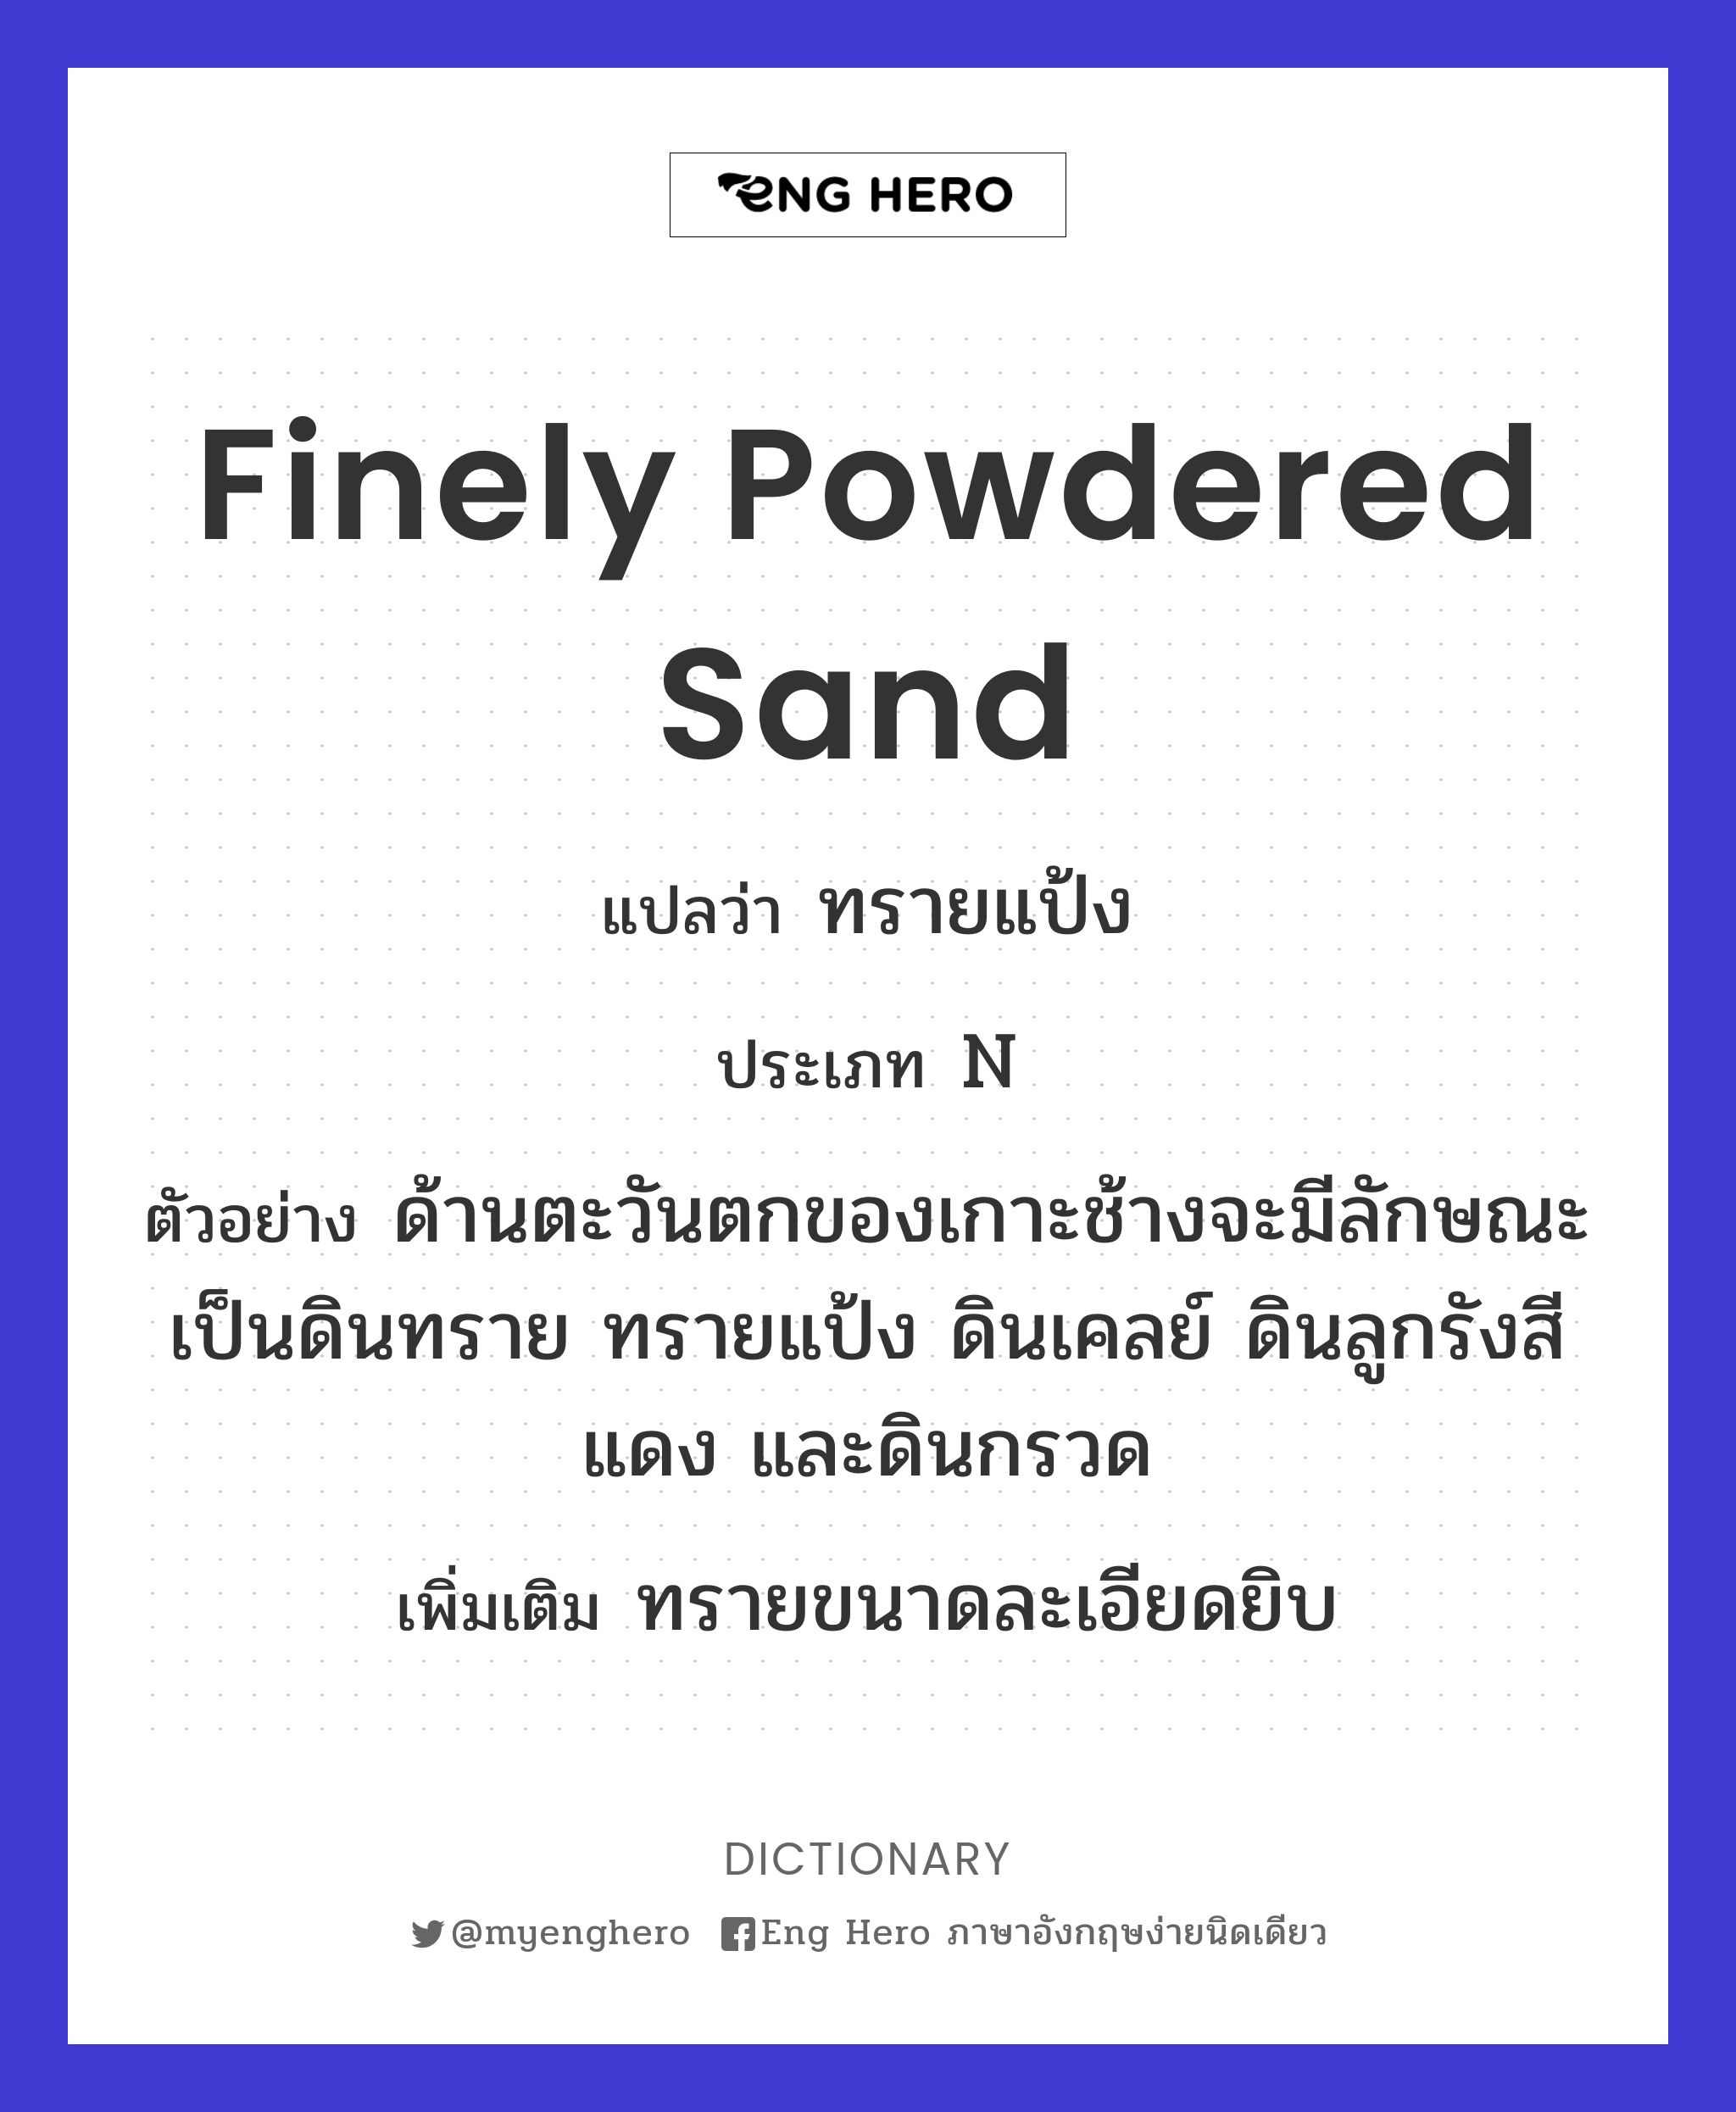 finely powdered sand